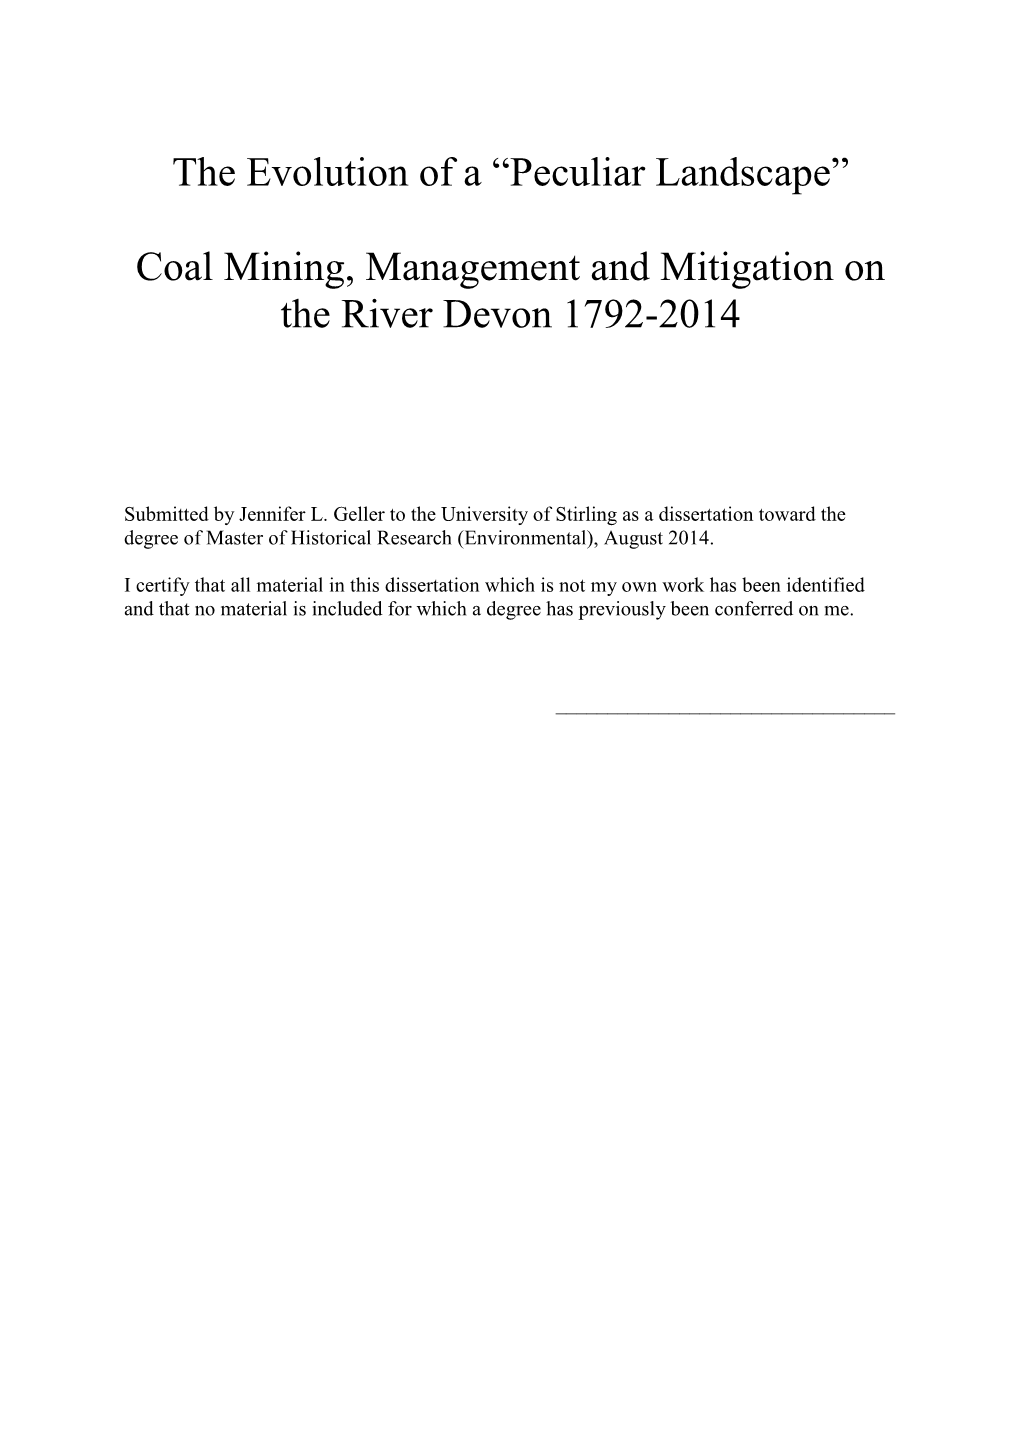 Coal Mining, Management and Mitigation on the River Devon 1792-2014